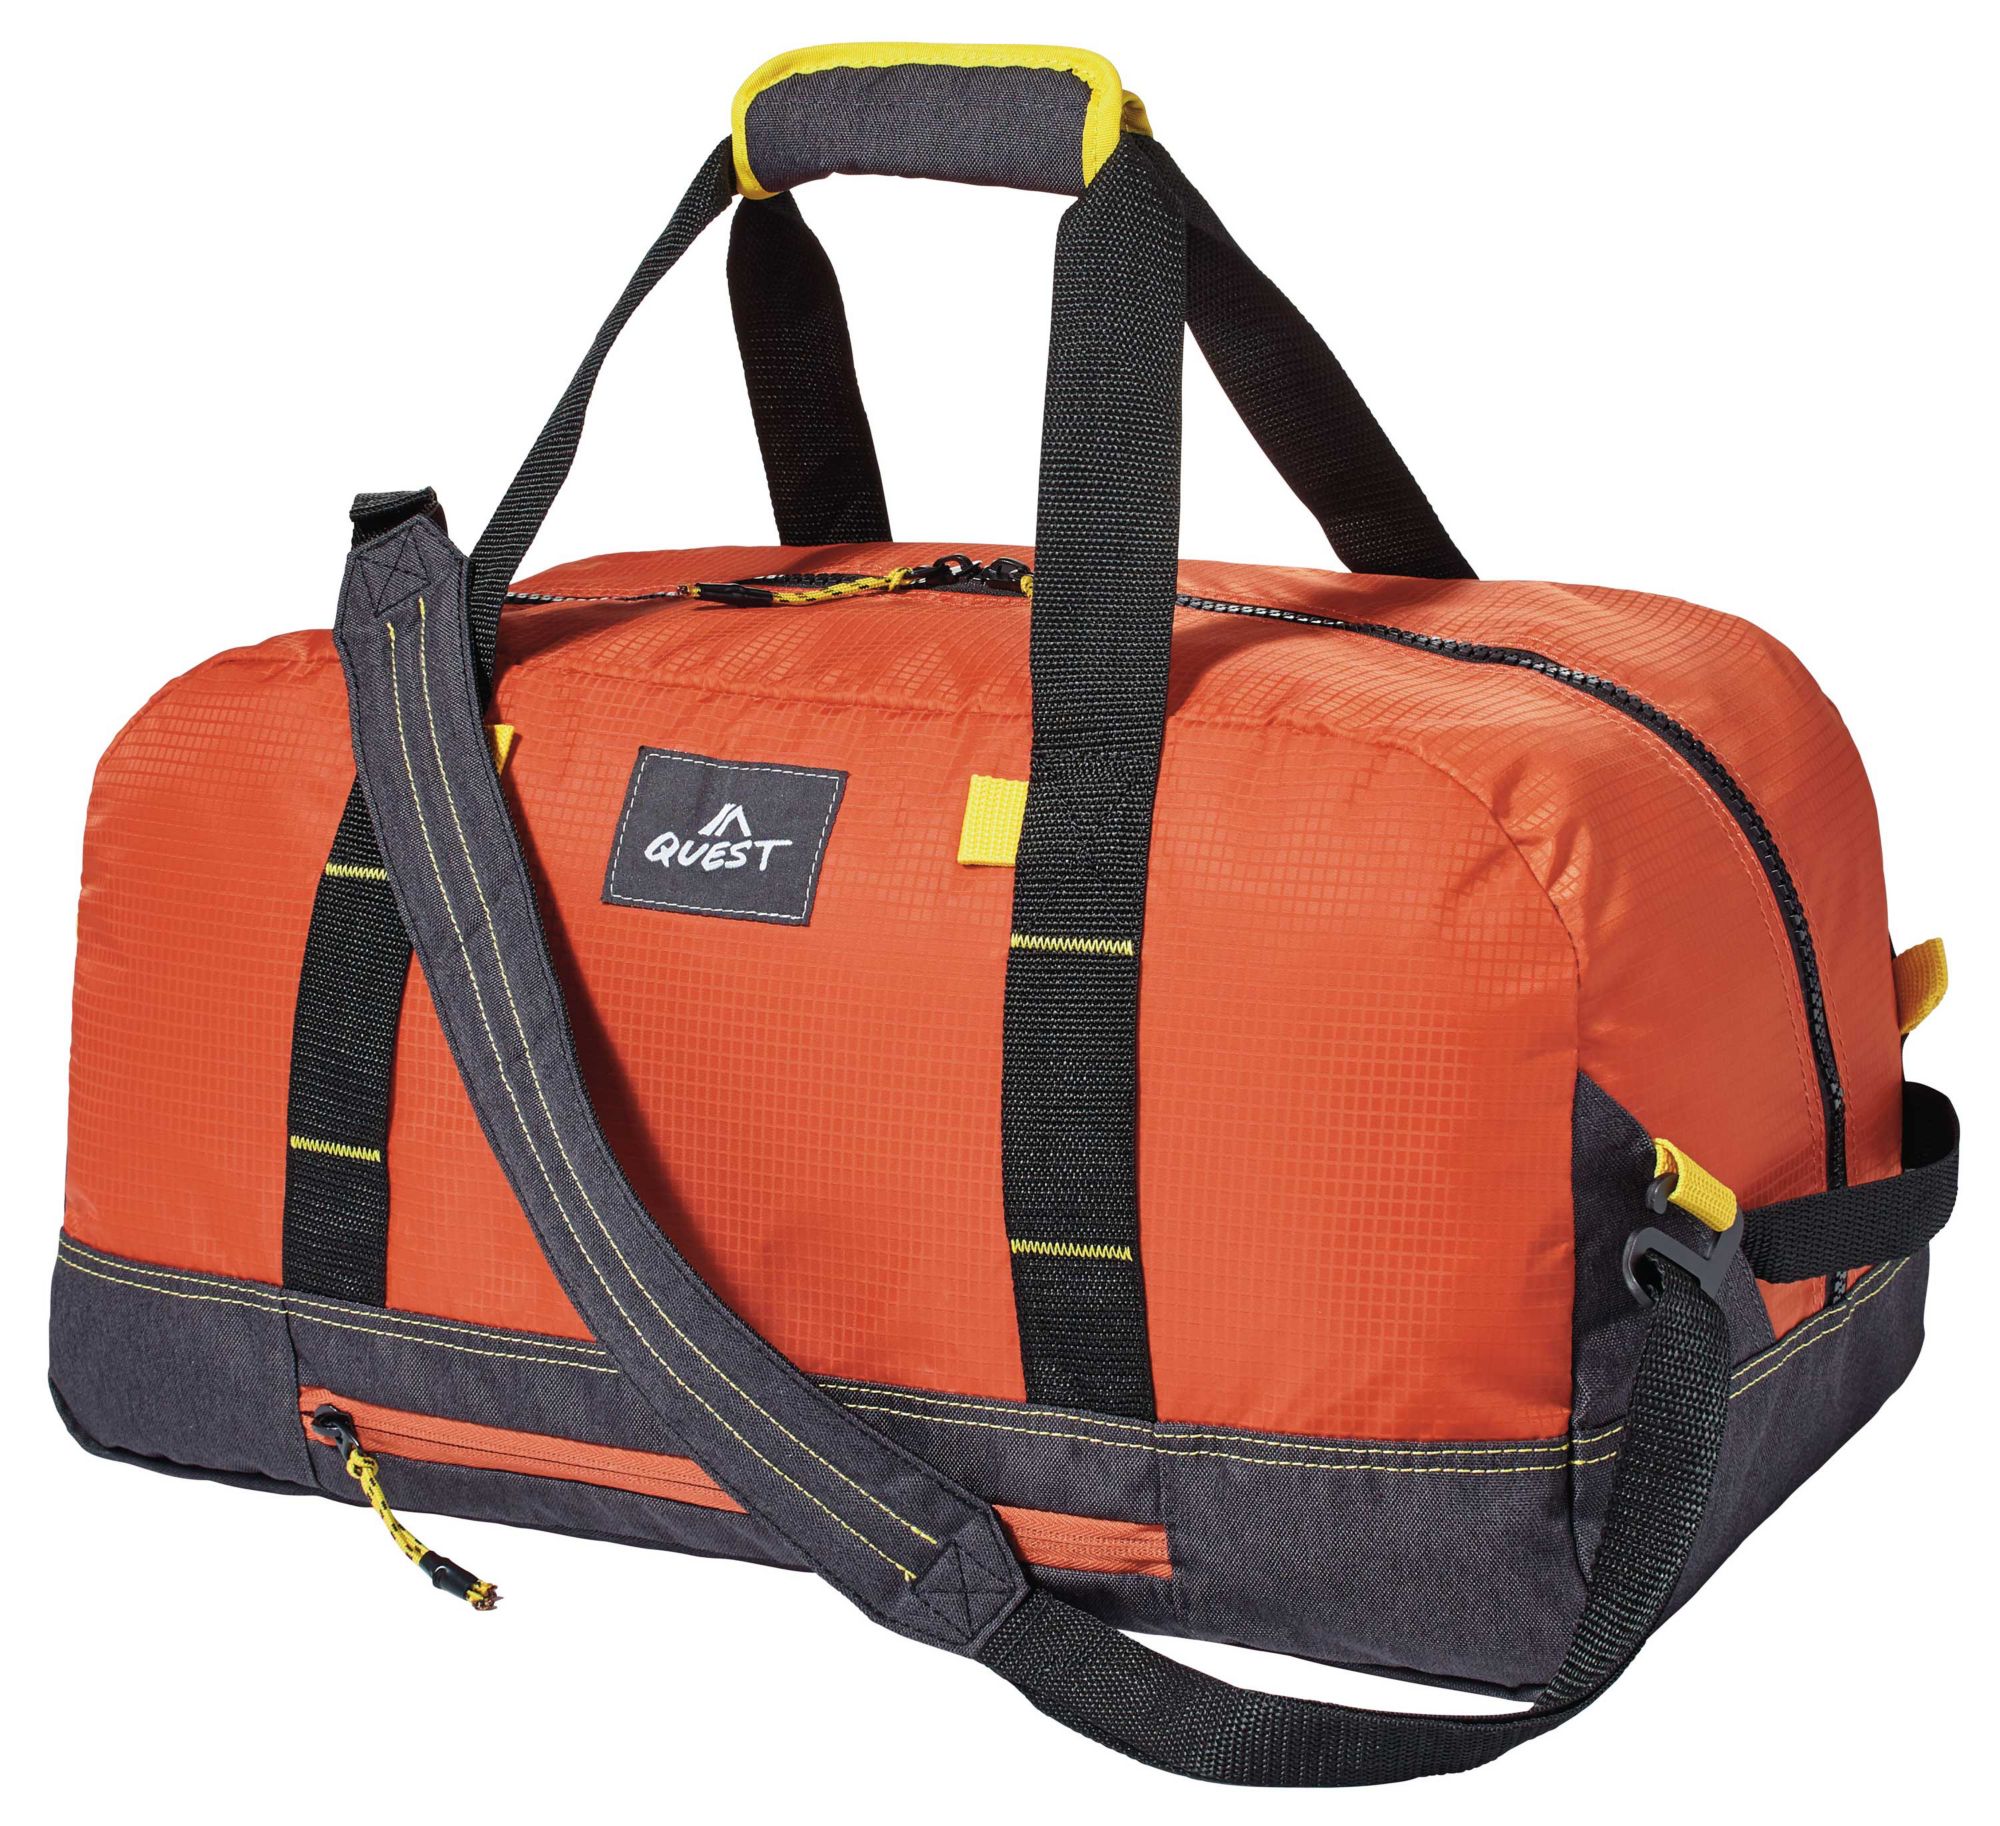 Quest Packable Duffle Bags (Small) $18 or (Medium) $20 + Free Store Pickup at Dick's Sporting Goods or FS on $49+